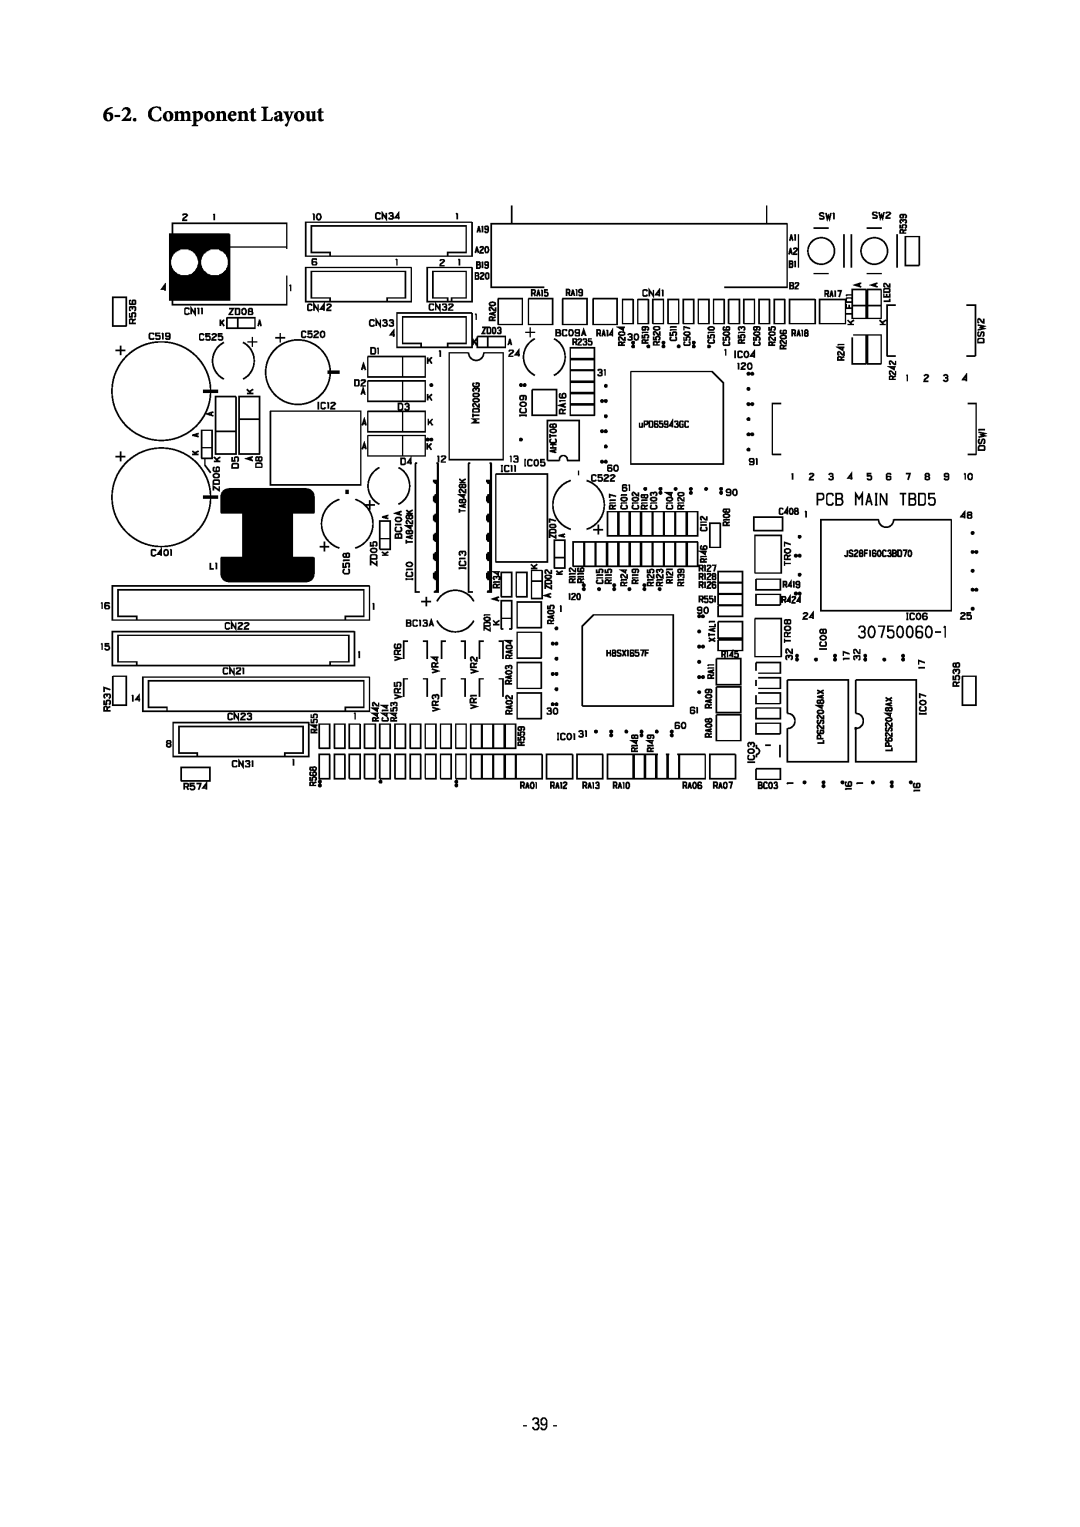 Star Micronics TUP500 technical manual Component Layout 